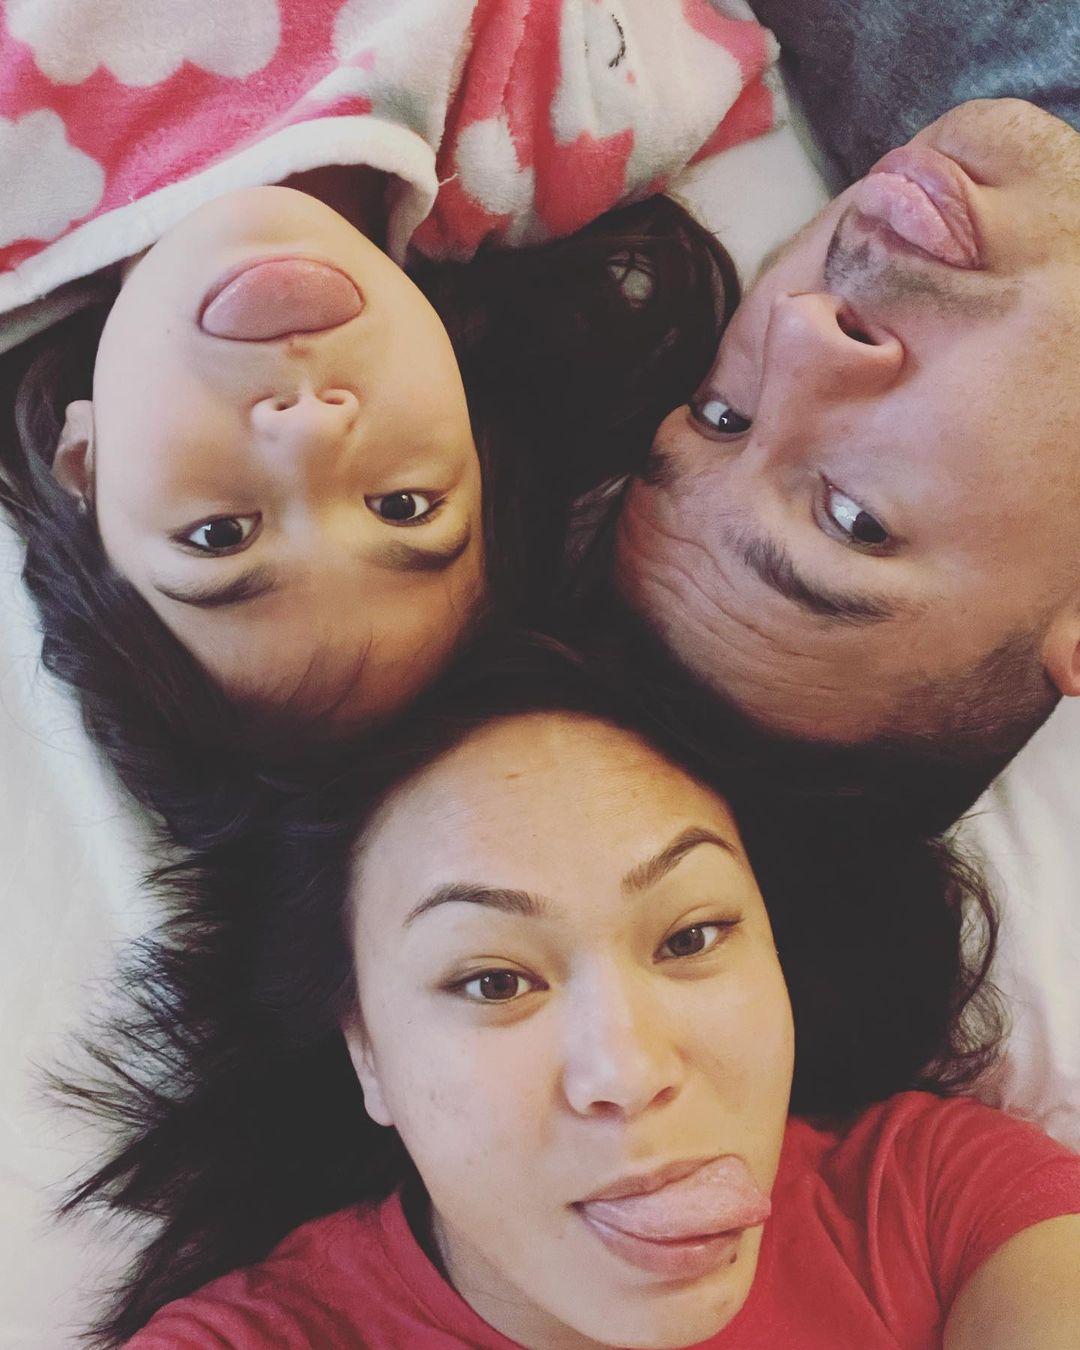 Michelle Waterson and Joshua welcomed their lovely daughter araya.